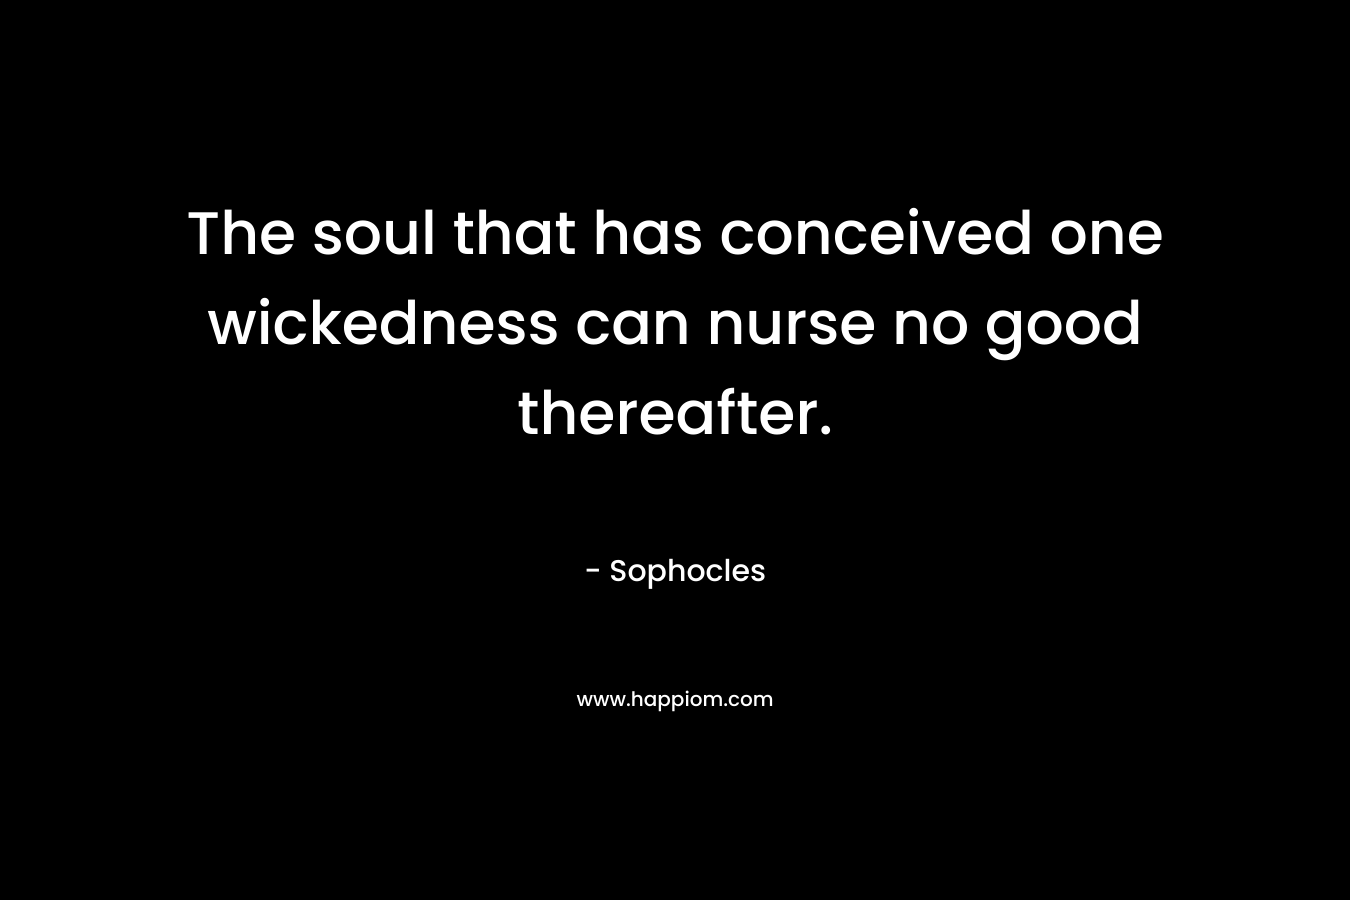 The soul that has conceived one wickedness can nurse no good thereafter.